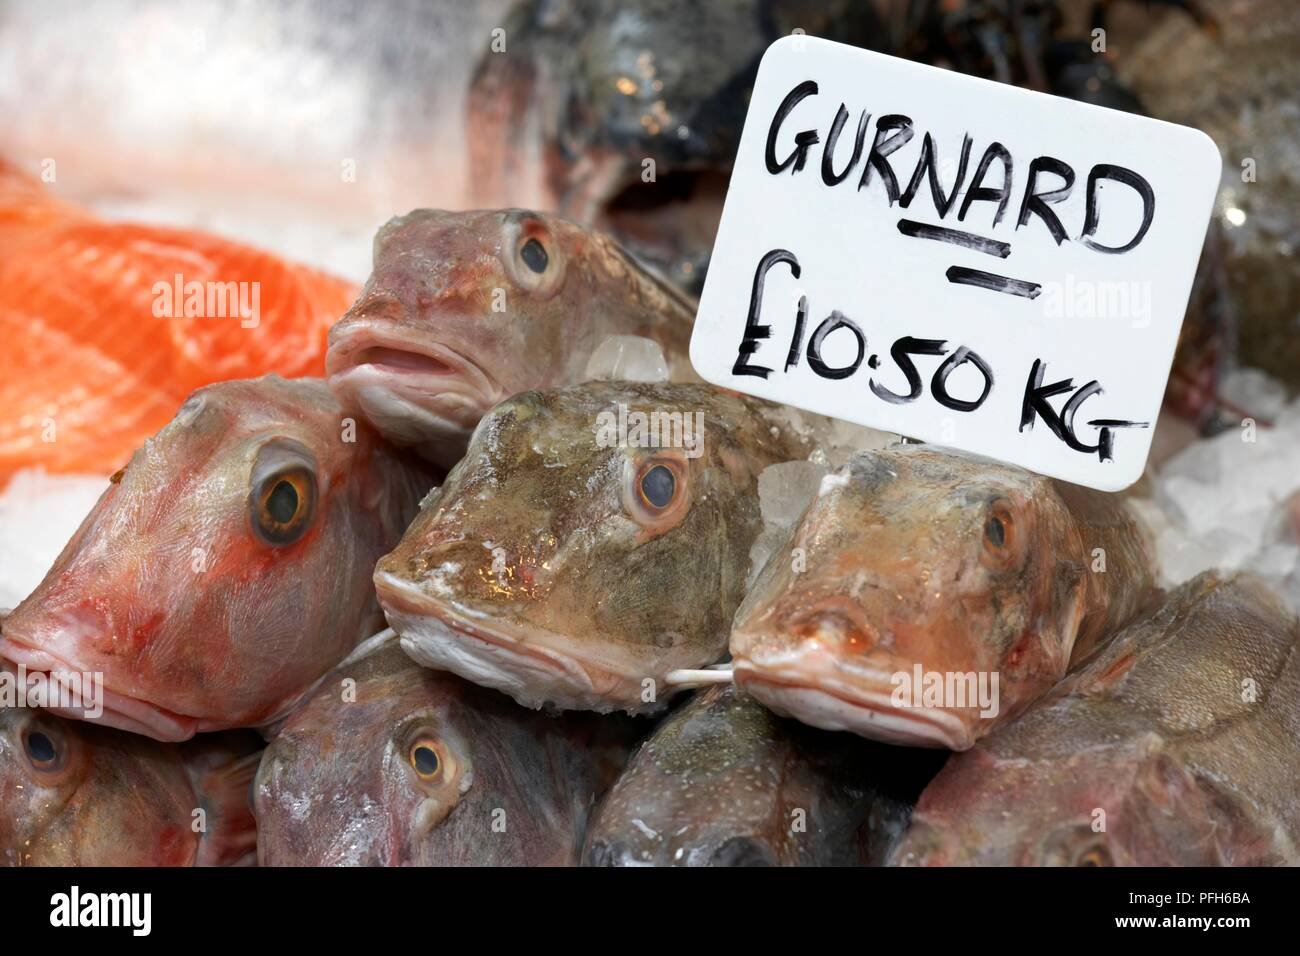 England, hand written price tag on stack of Gurnard fish for sale on fishmonger's stall Stock Photo